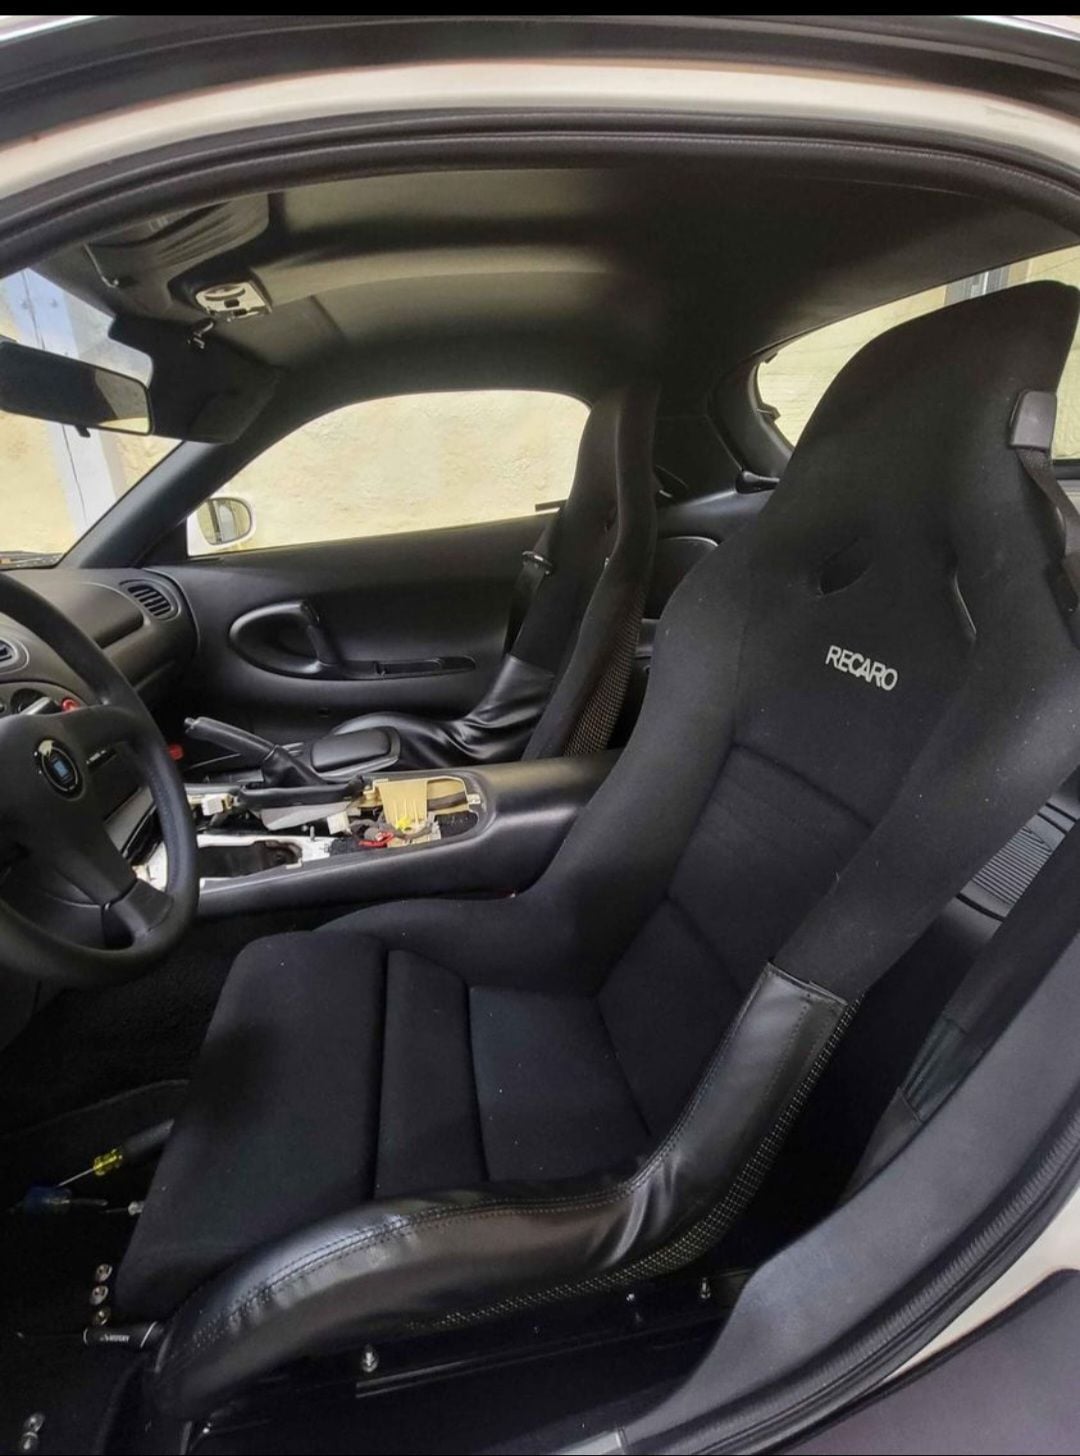 Interior/Upholstery - Recaro RZ reps W Titlworx rails - New - 1993 to 2002 Mazda RX-7 - West Harrison, IN 47060, United States